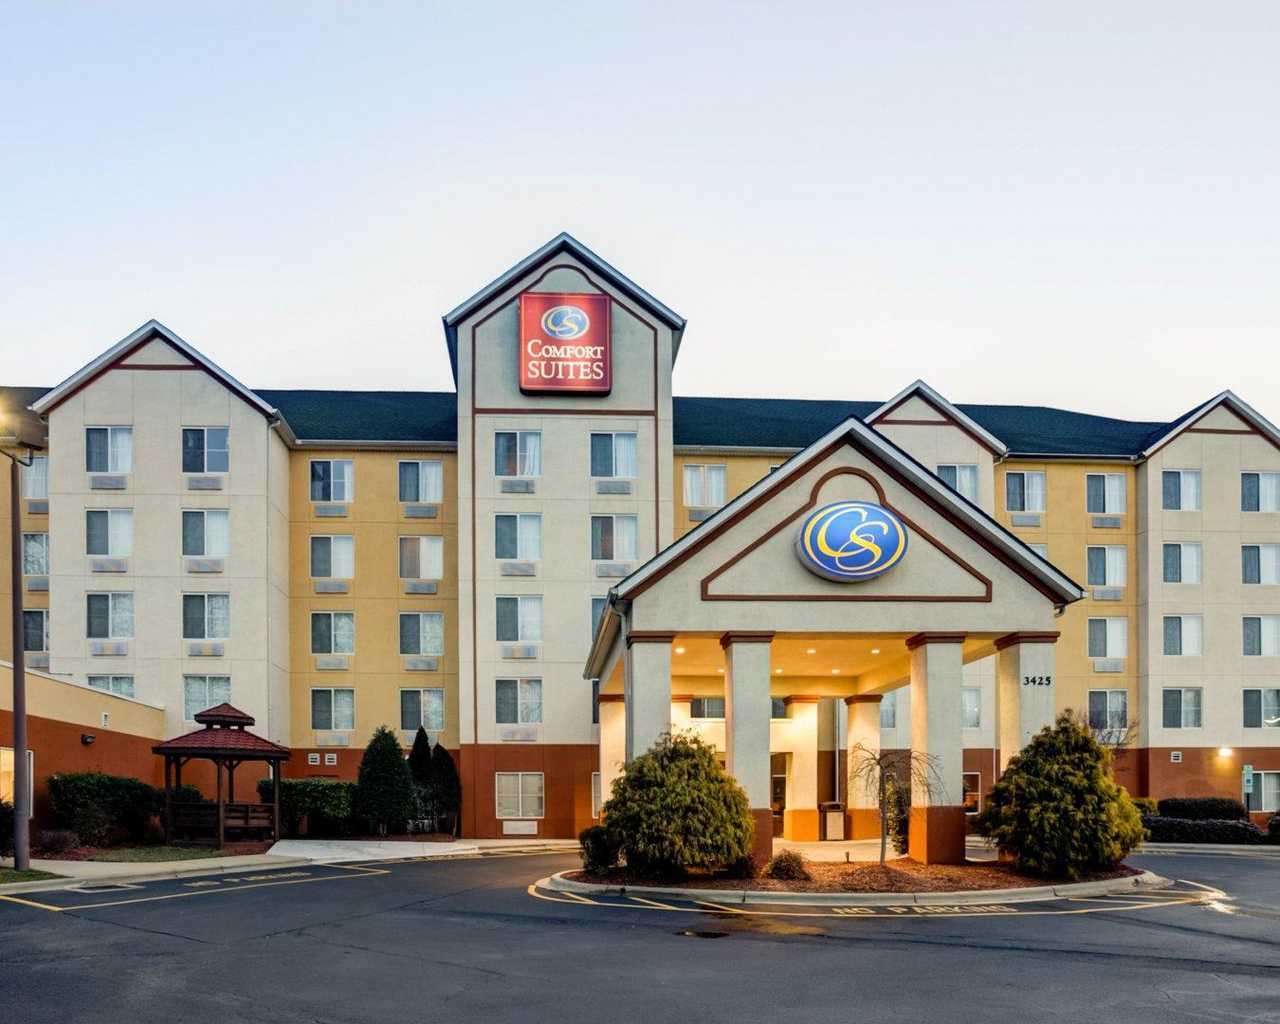 Photo of Comfort Suites Charlotte Airport, Charlotte, NC